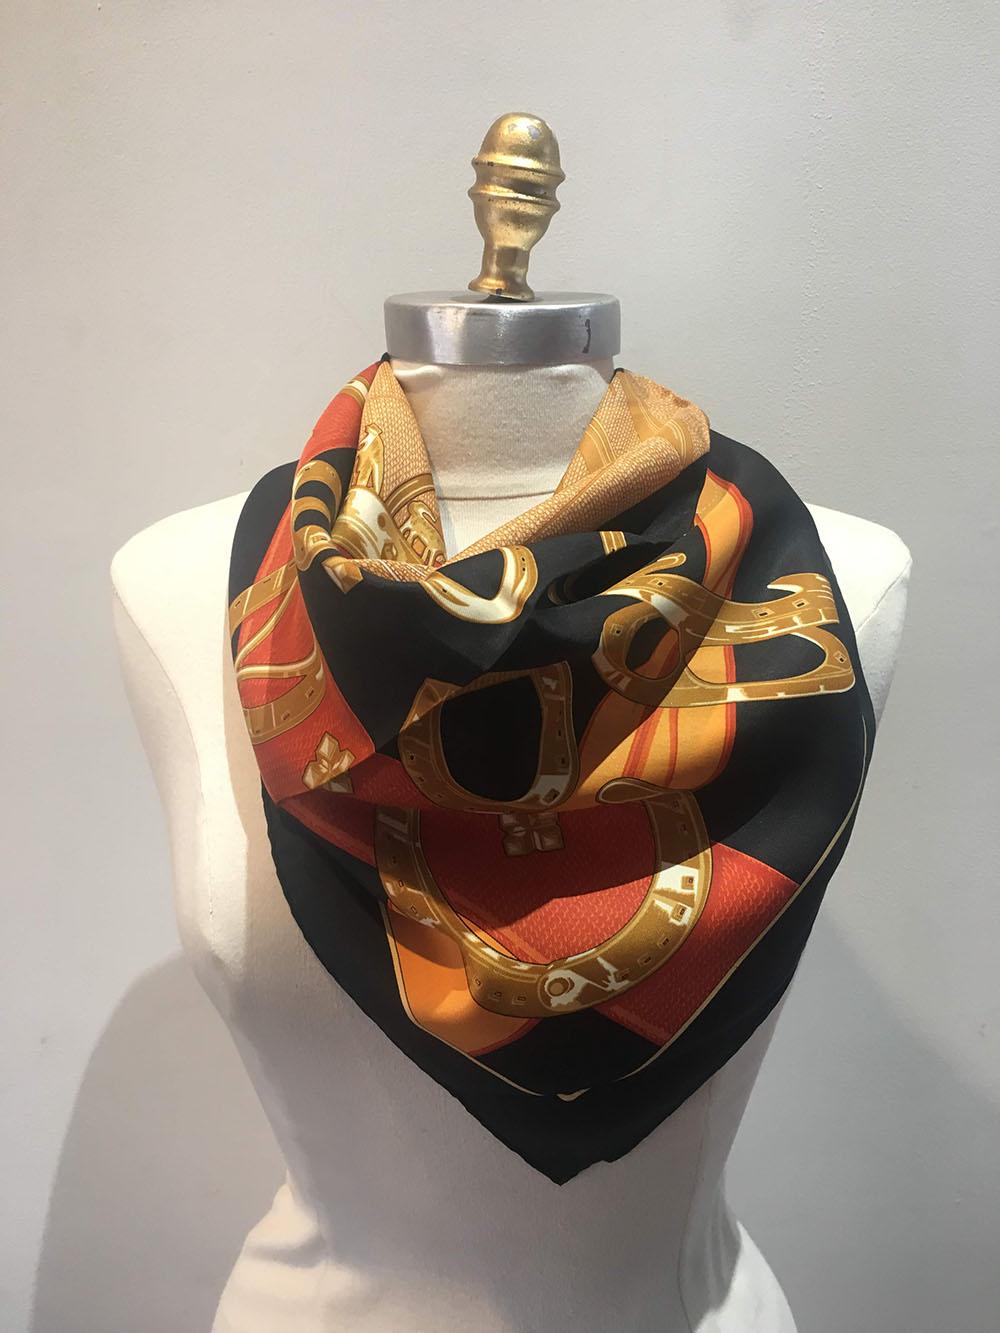 RARE Hermes Vintage Porte Bonheur Silk Scarf in Black in very good condition. Original silk screen design c1976 features an assortment of lucky horseshoes over a black background with a centered tan and gold crown diamond pattern design and red and